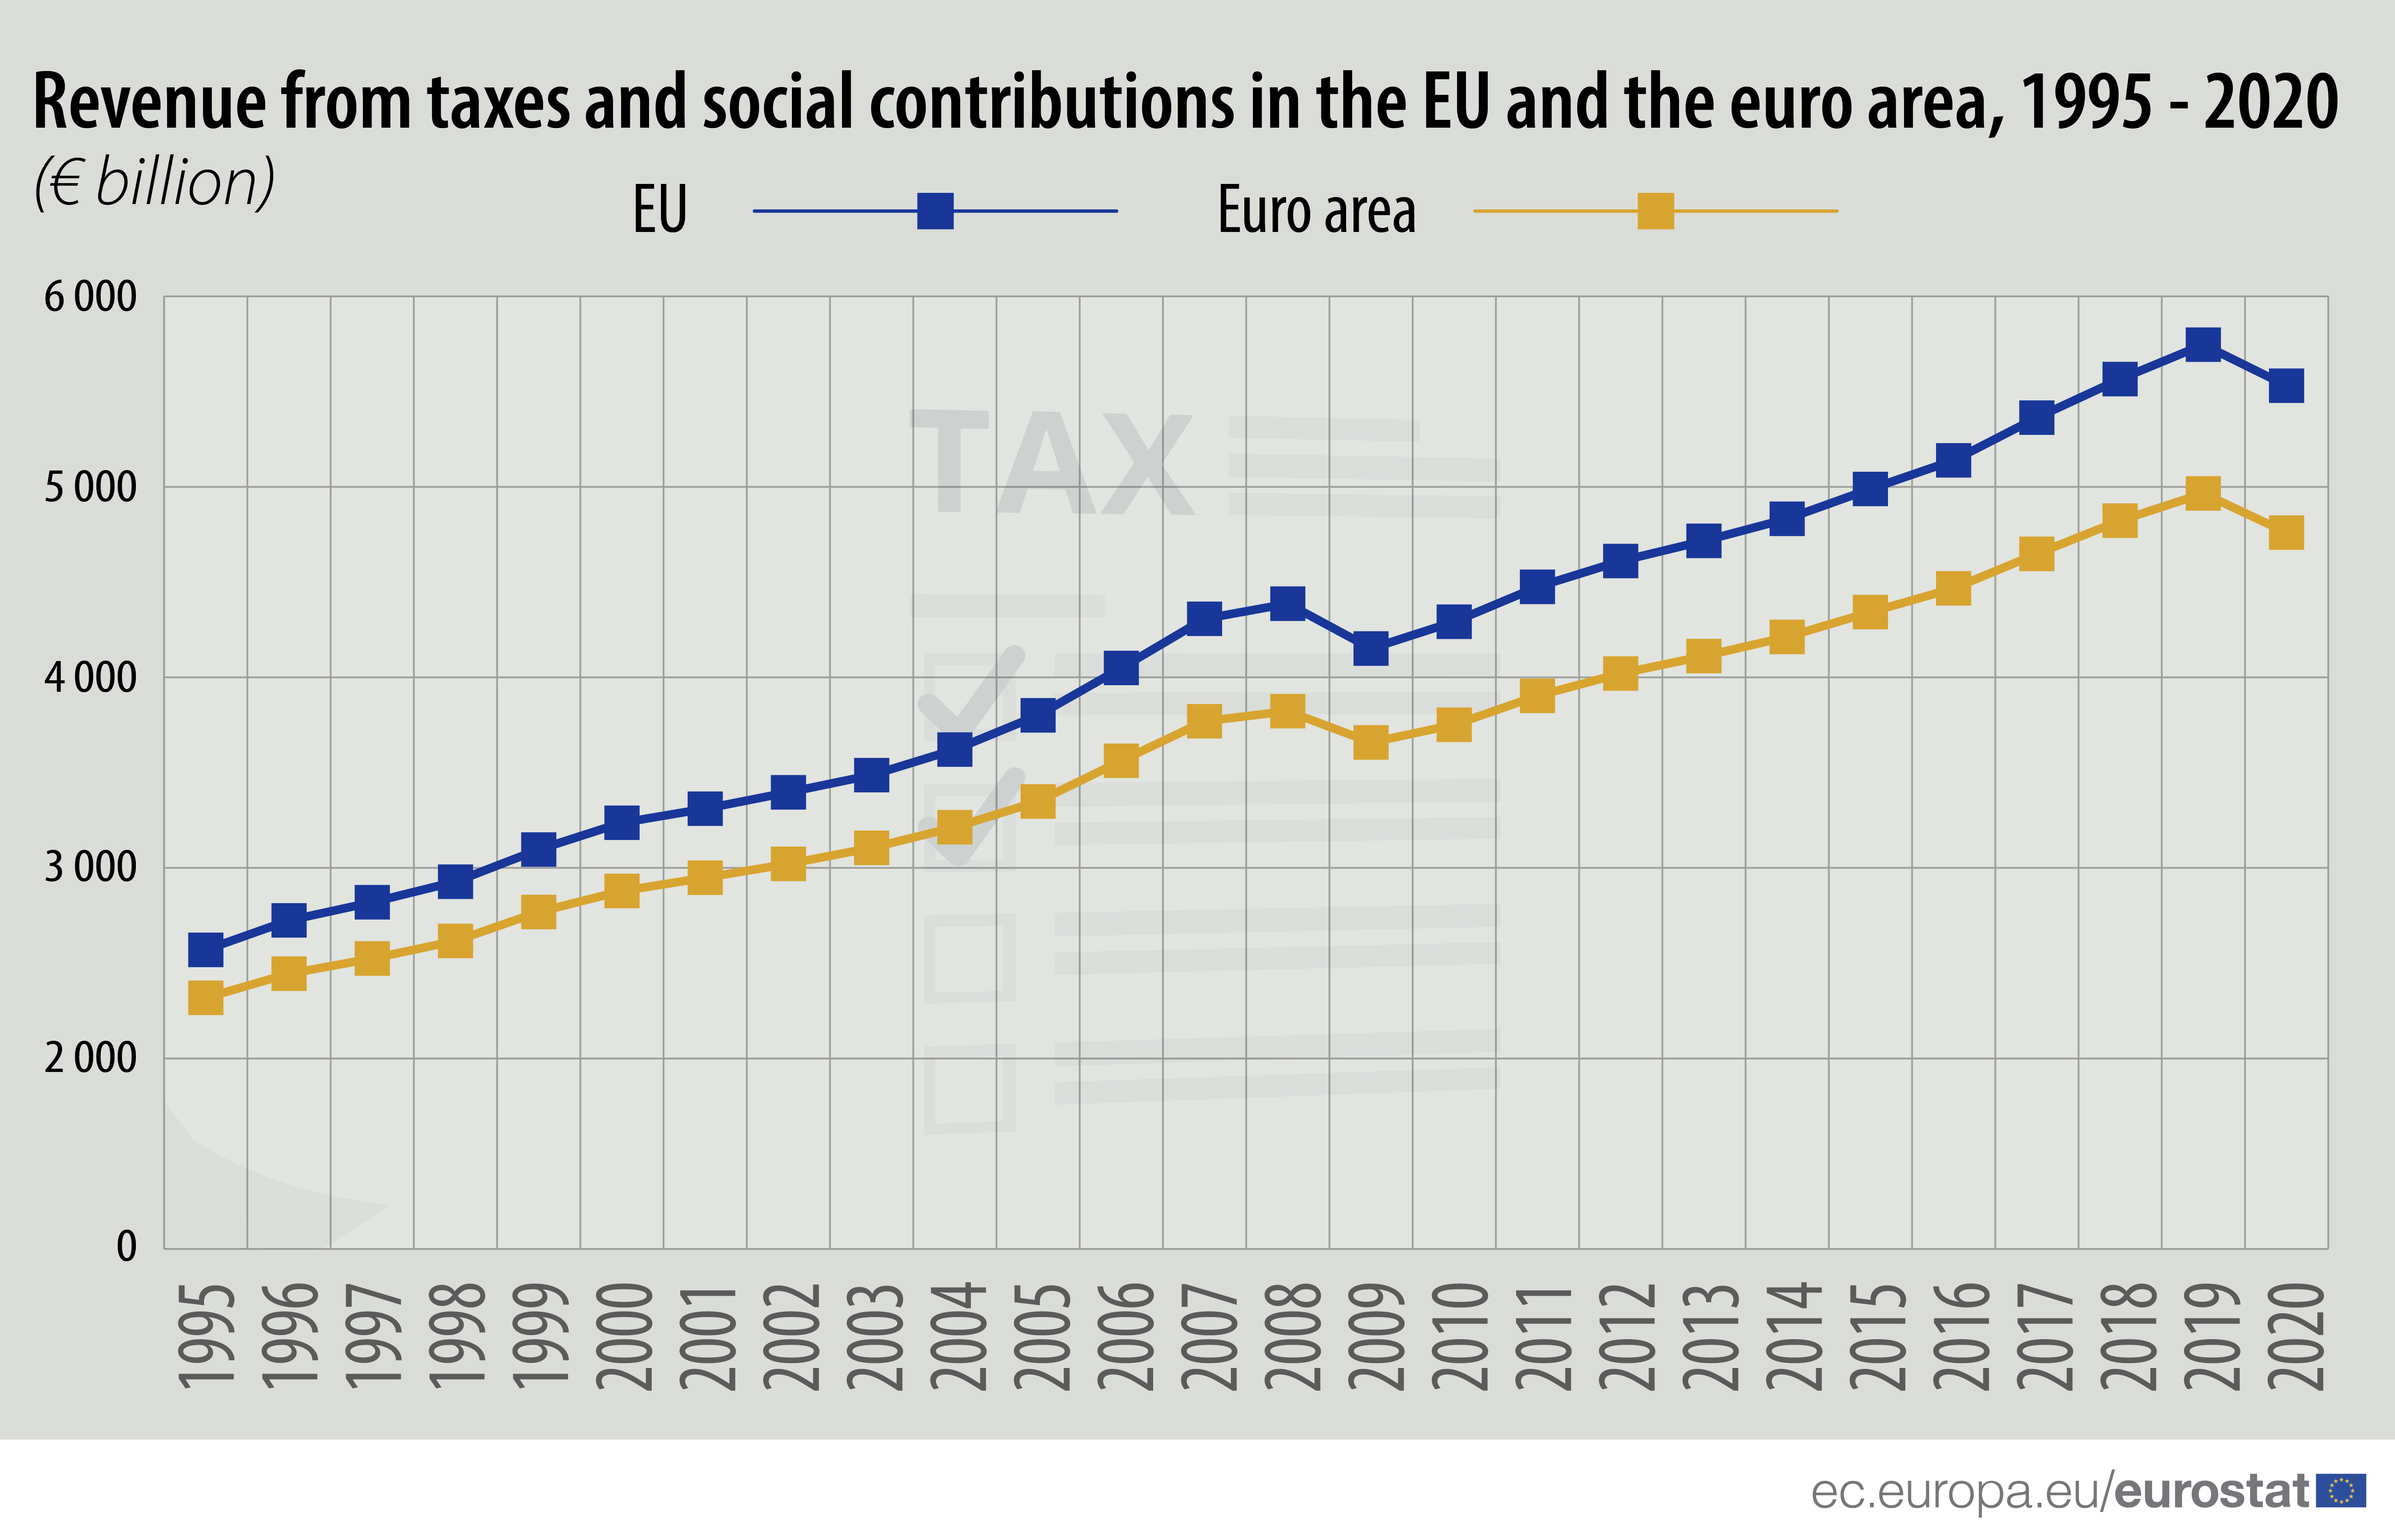 Time series: Revenue from taxes and social contributions in the EU and euro area, 1995-2020, in € billion